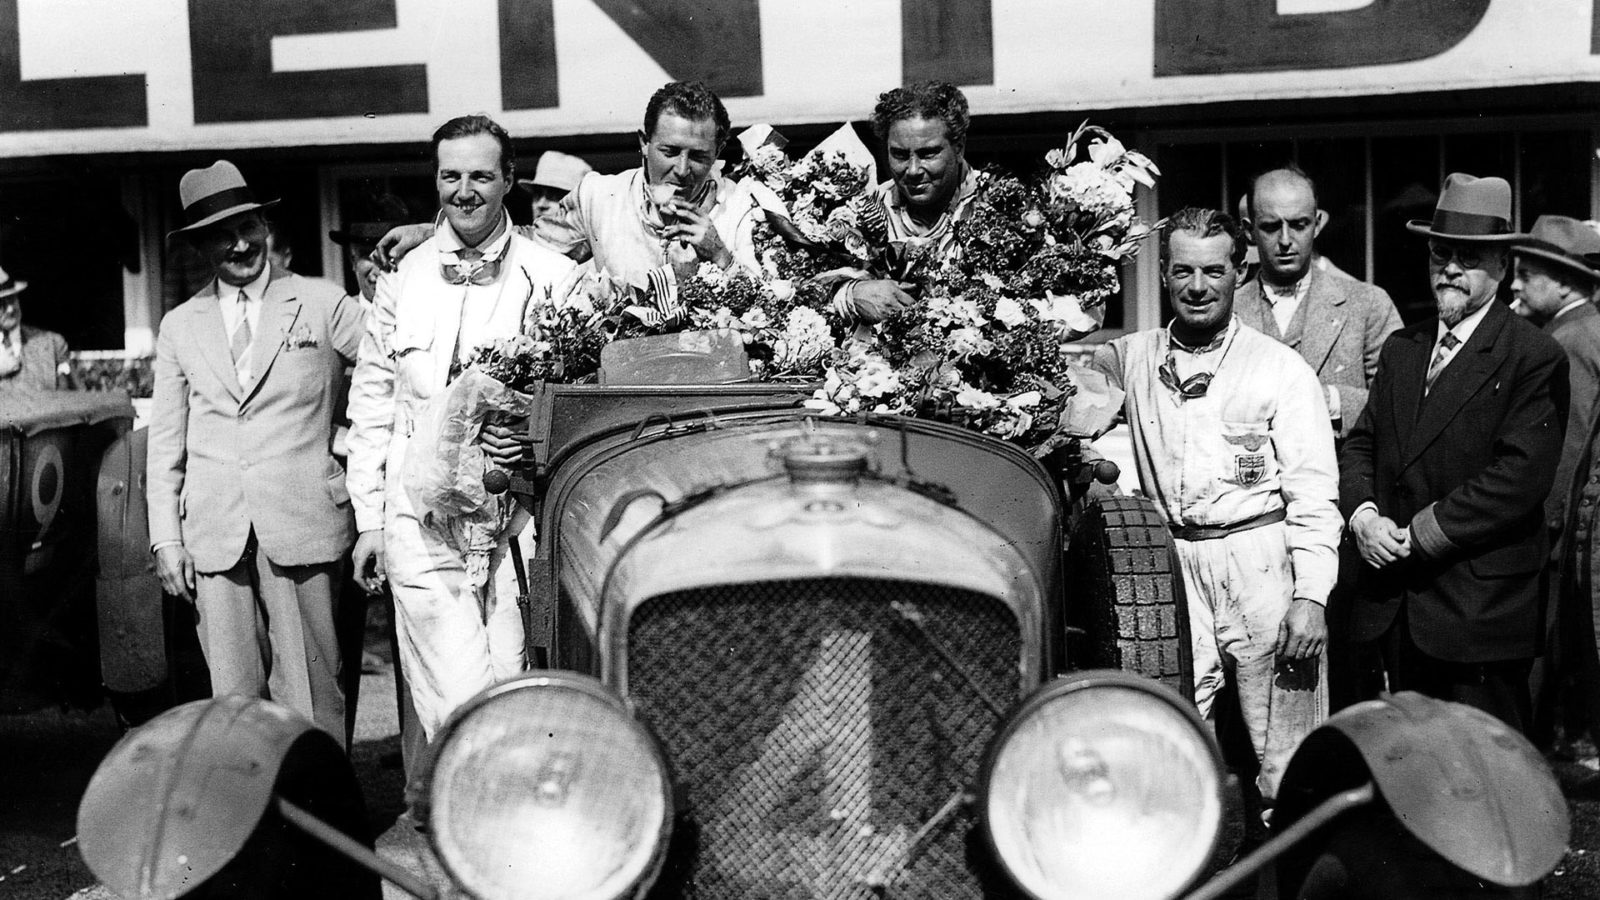 AUTO - 24H DU MANS - LE MANS 1930 (FRA) - 21-22/06/1930 - PHOTO : LAT / DPPI - Woolf Barnato, Glen Kidston (Bentley Speed Six), 1st position, with 2nd placed drivers Richard Watney (left) and Frank Clement on either side - PODIUM Ref-Autocar B4195.